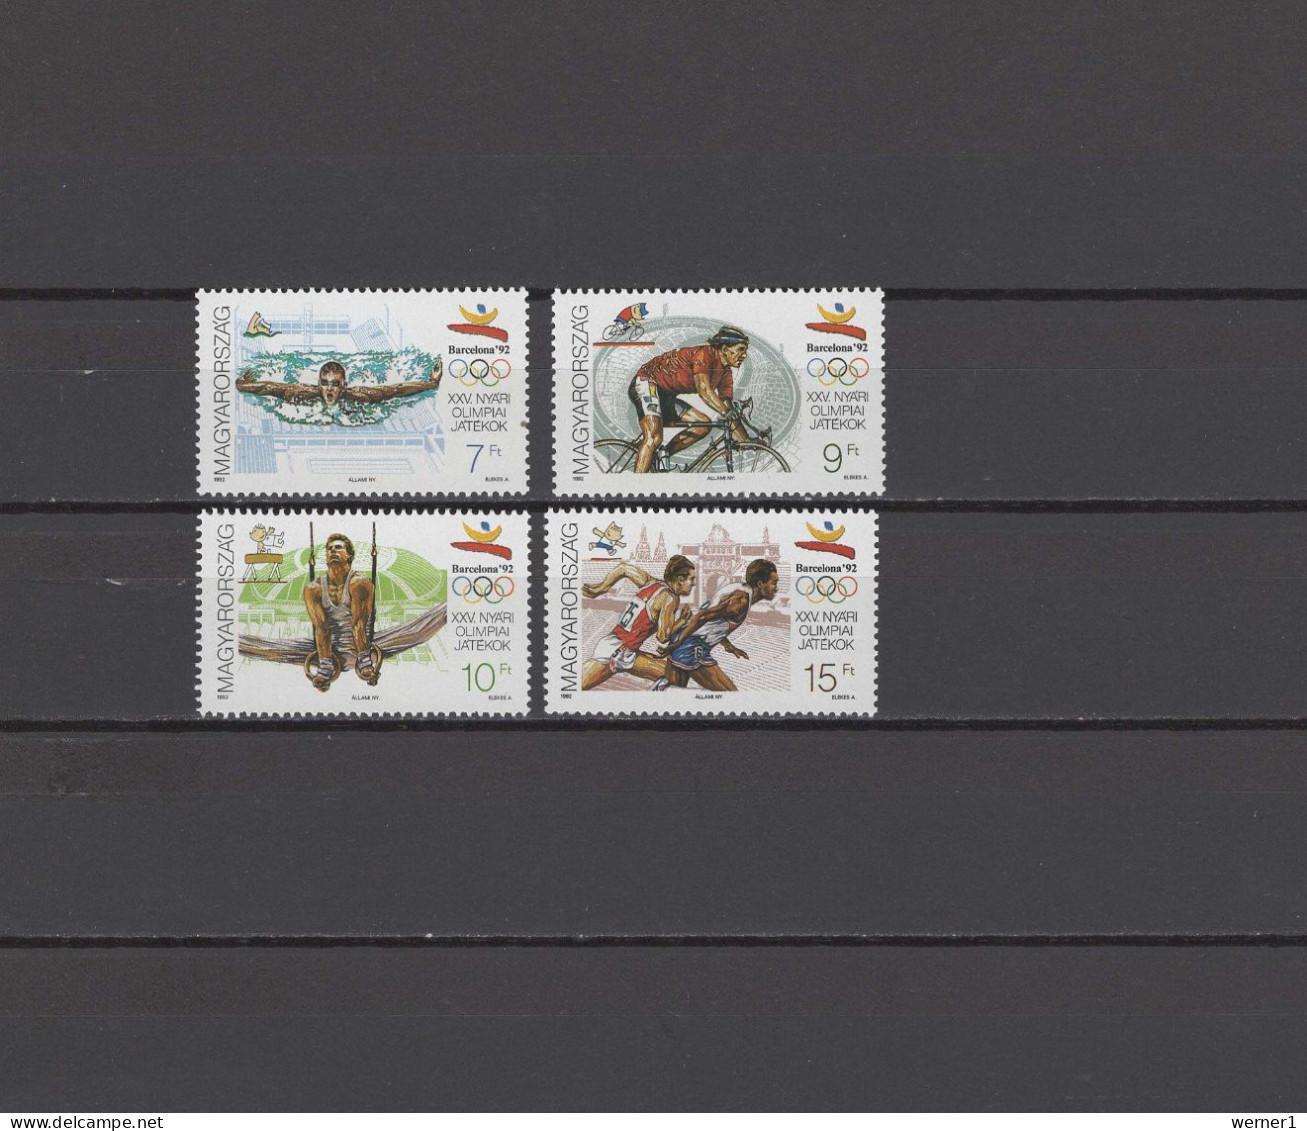 Hungary 1992 Olympic Games Barcelona, Cycling, Swimming Etc. Set Of 4 MNH - Ete 1992: Barcelone